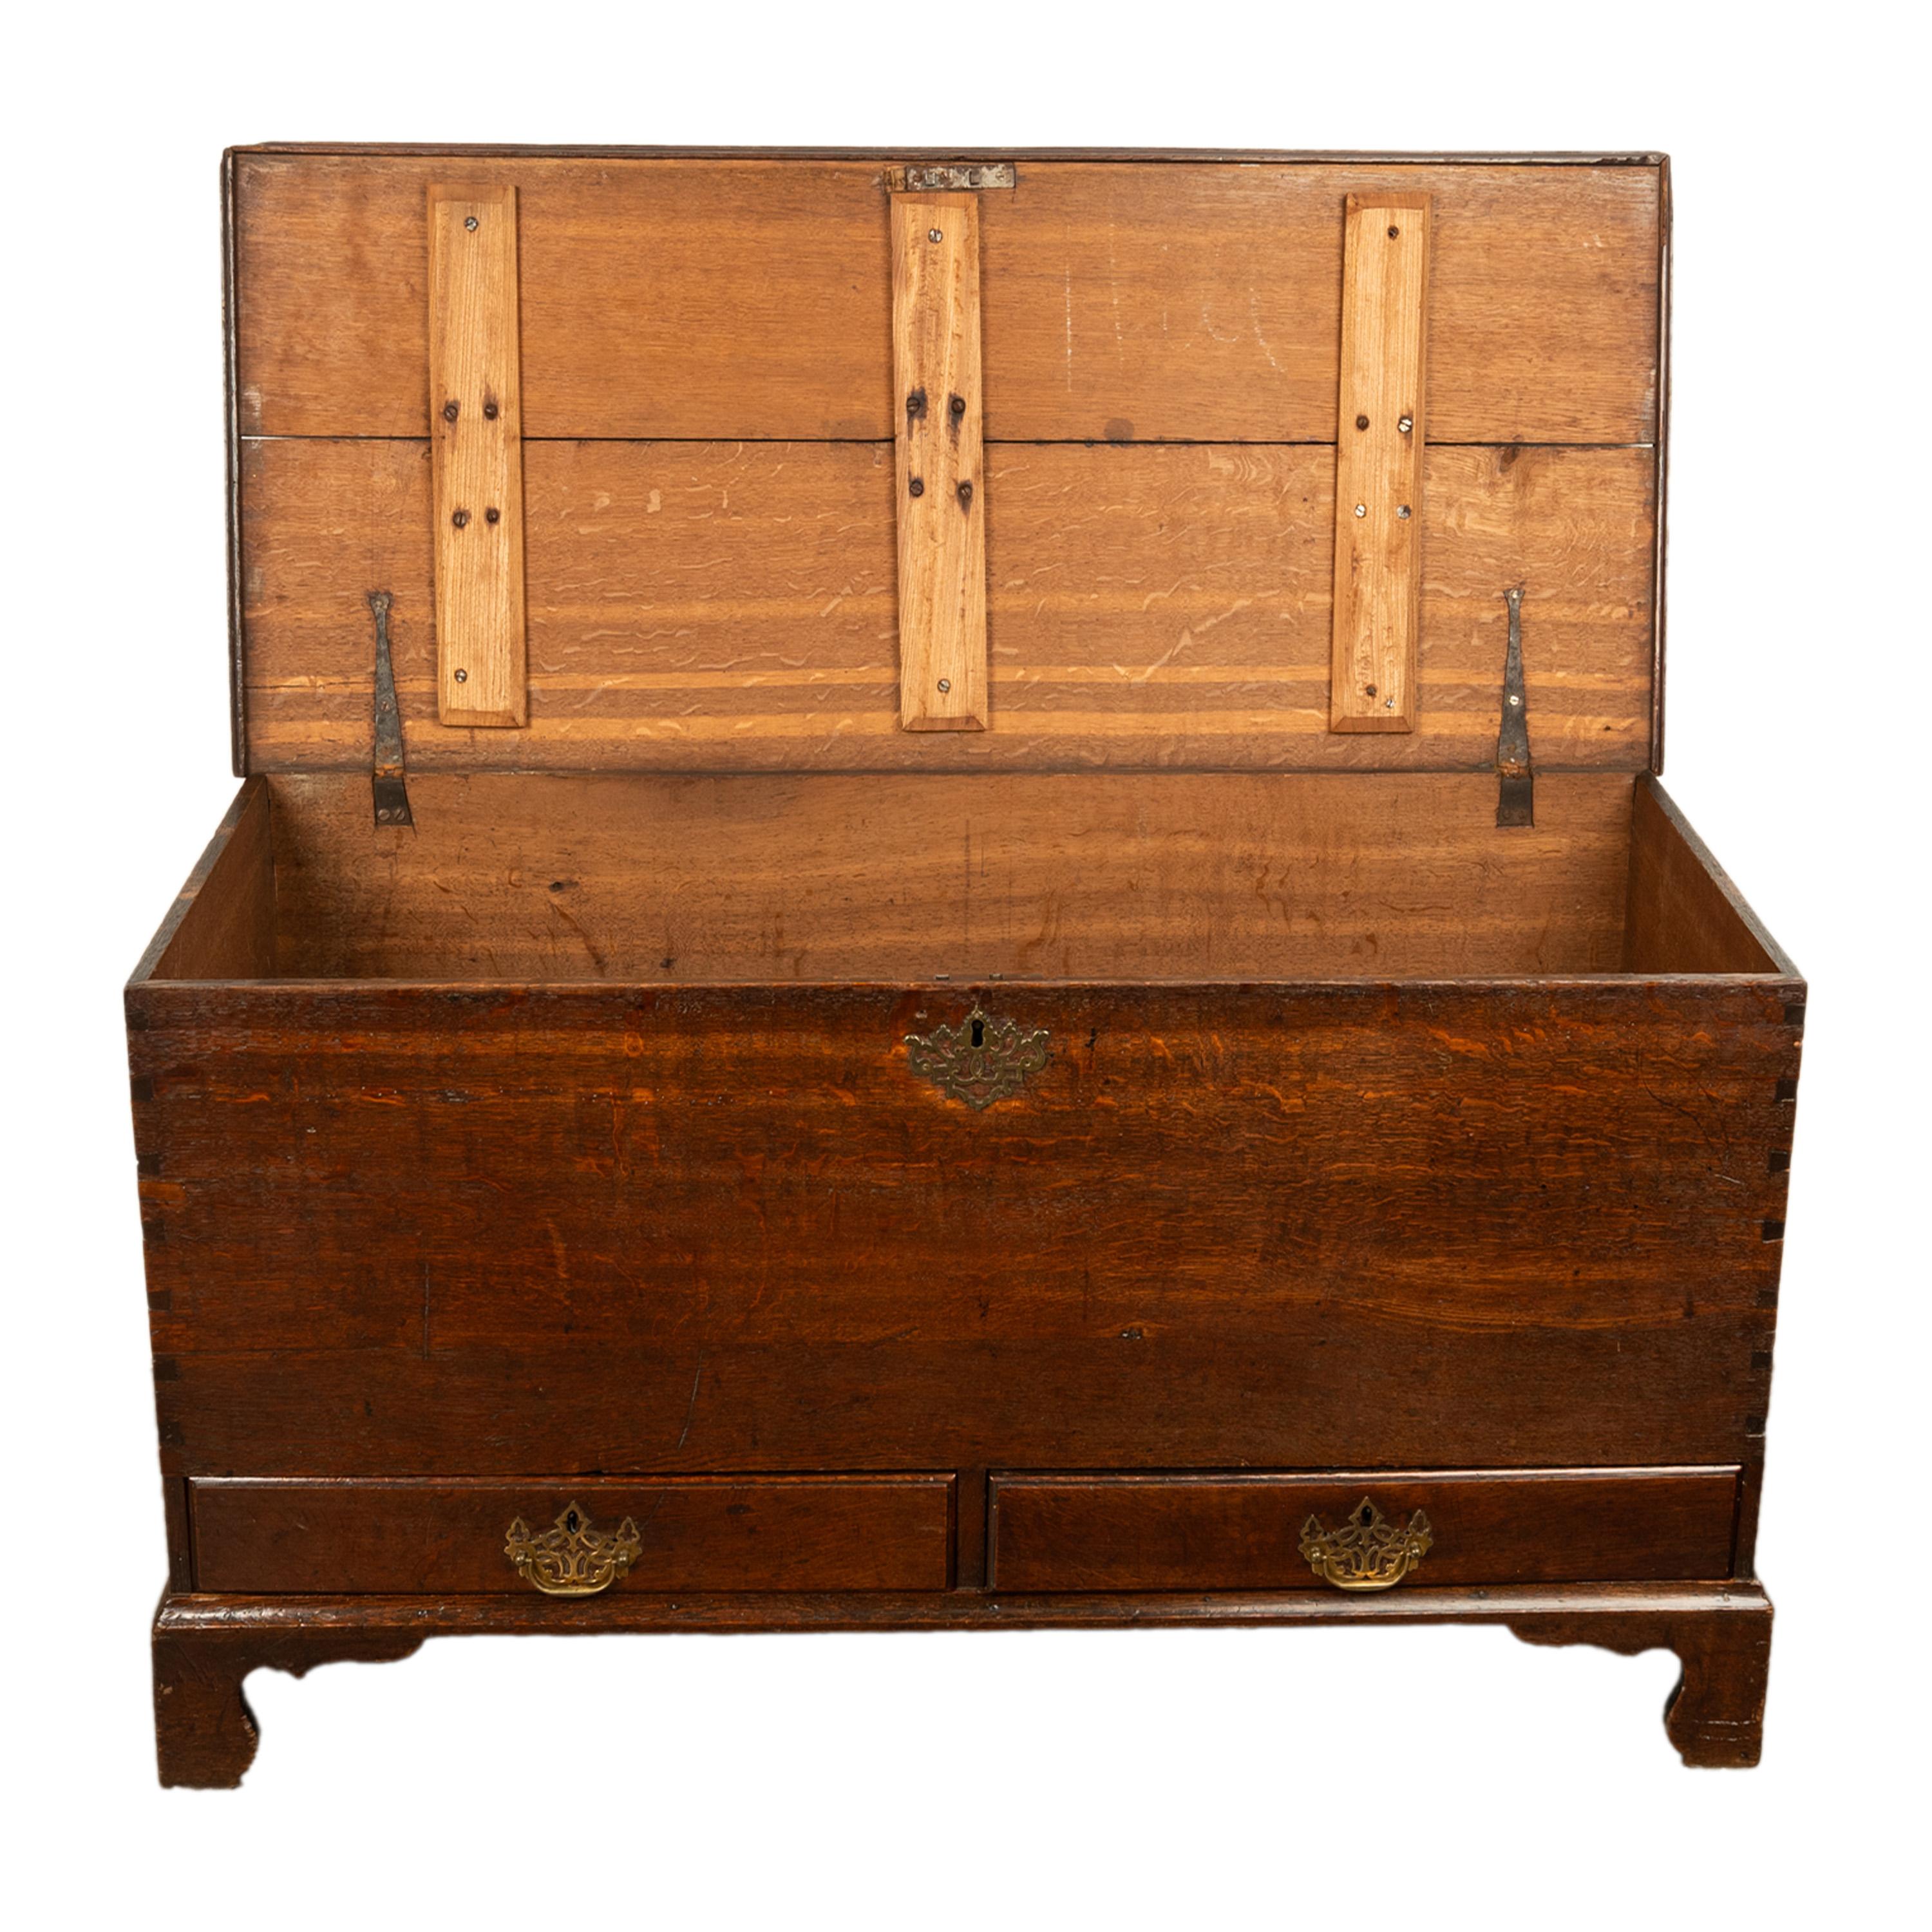 Antique George III Georgian Oak Dovetailed Mule Chest Coffer Drawers 1760 For Sale 7